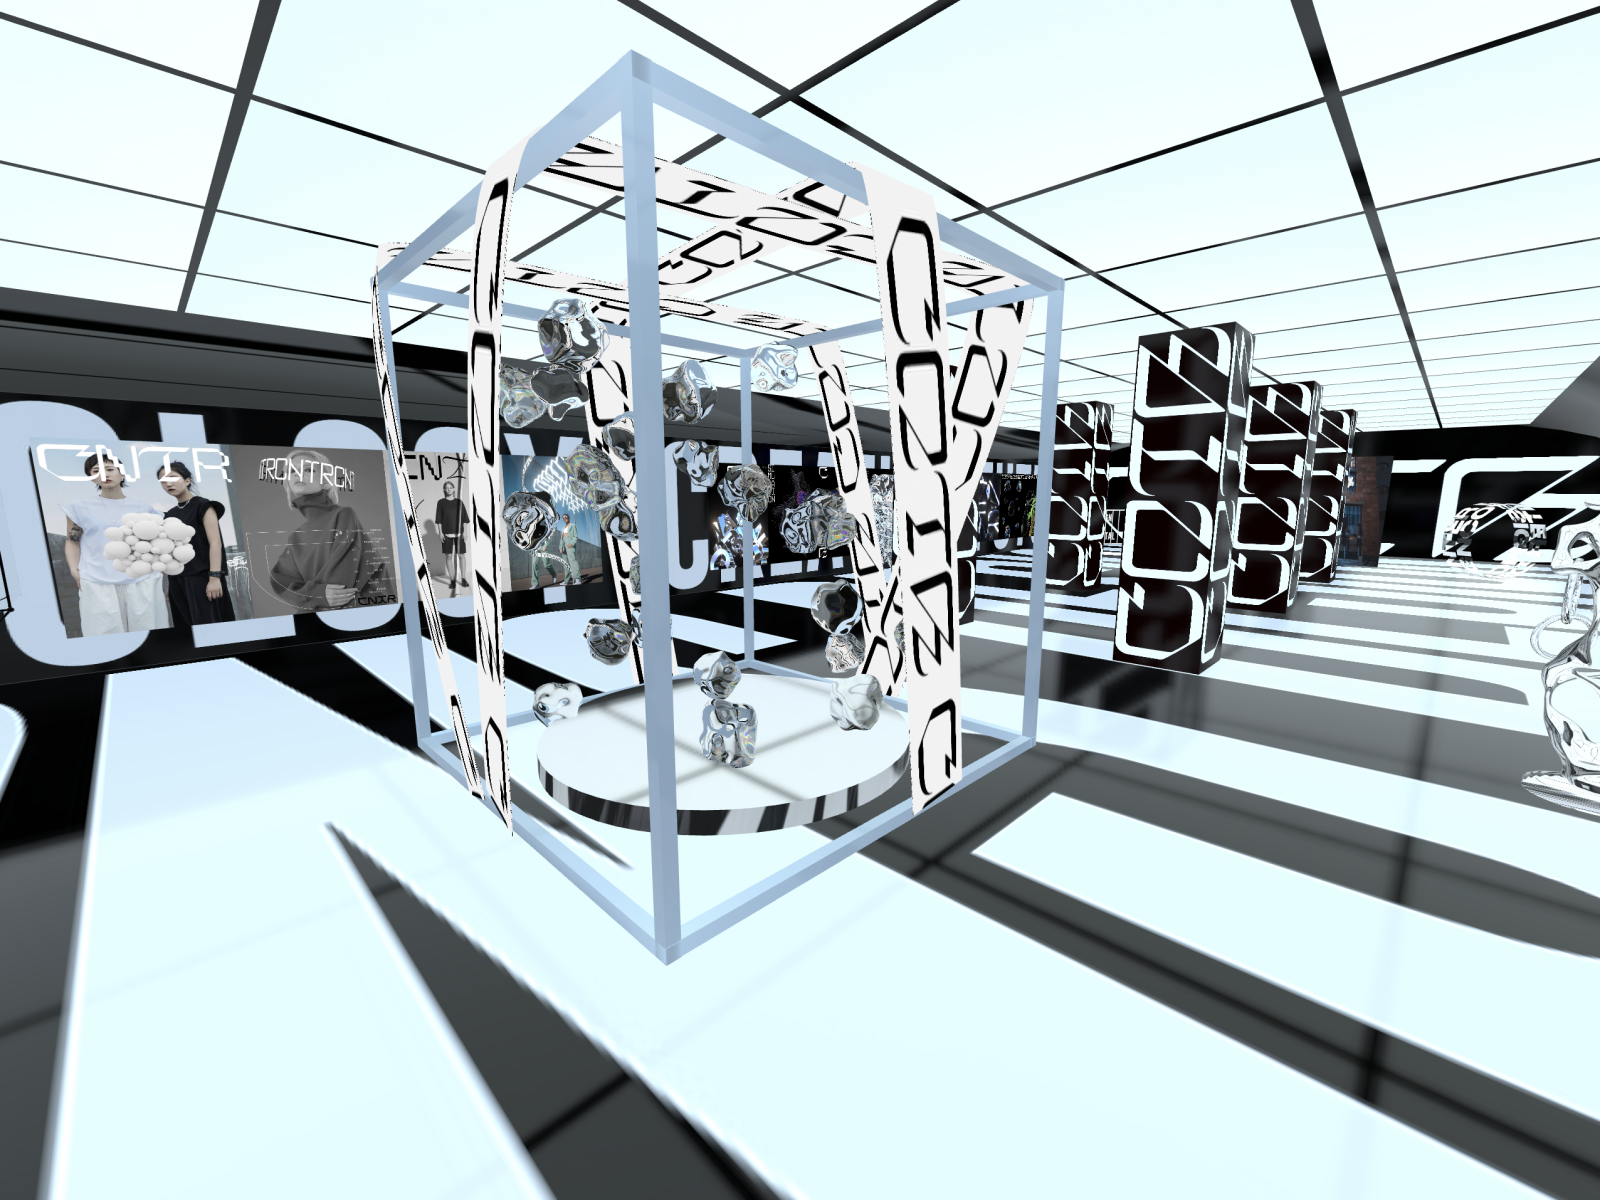 A gallery of works in the form of a virtual space